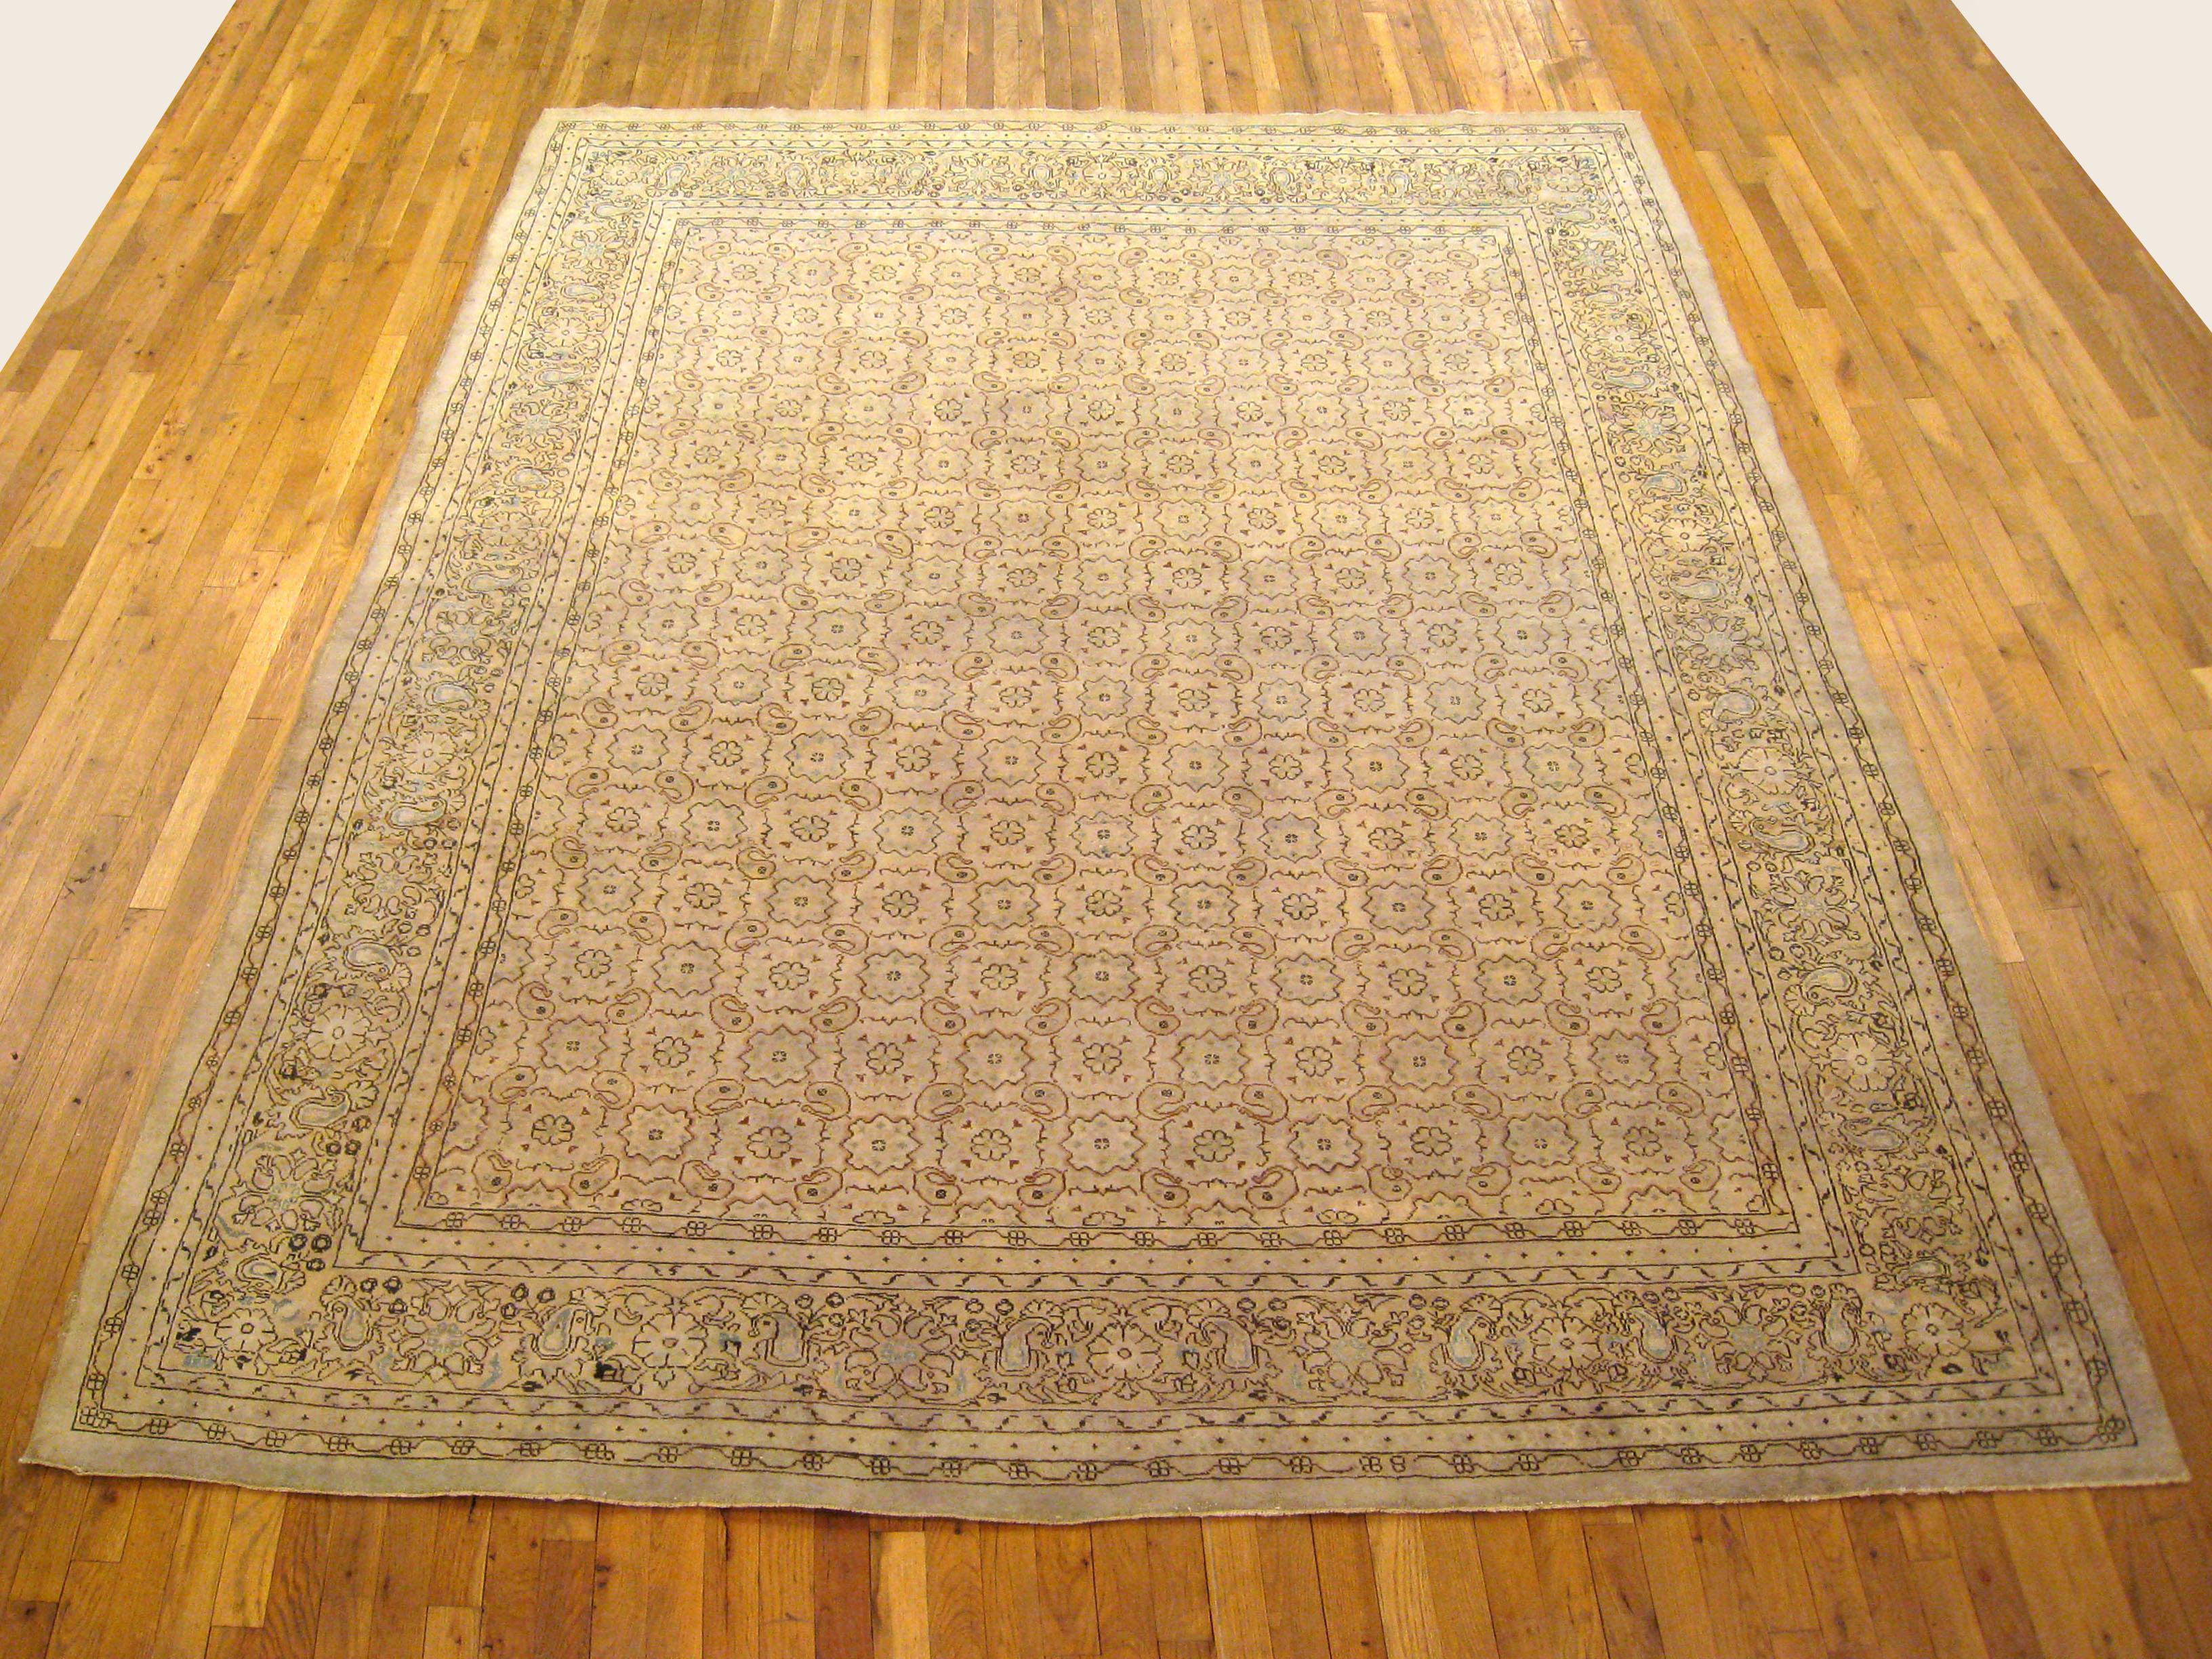 Antique Turkish Sivas rug, Room size, circa 1900

A one-of-a-kind antique Turkish Sivas Oriental Carpet, hand-knotted with soft wool pile. This beautiful hand-knotted wool rug features delicate rosettes covering a gray primary field, with an